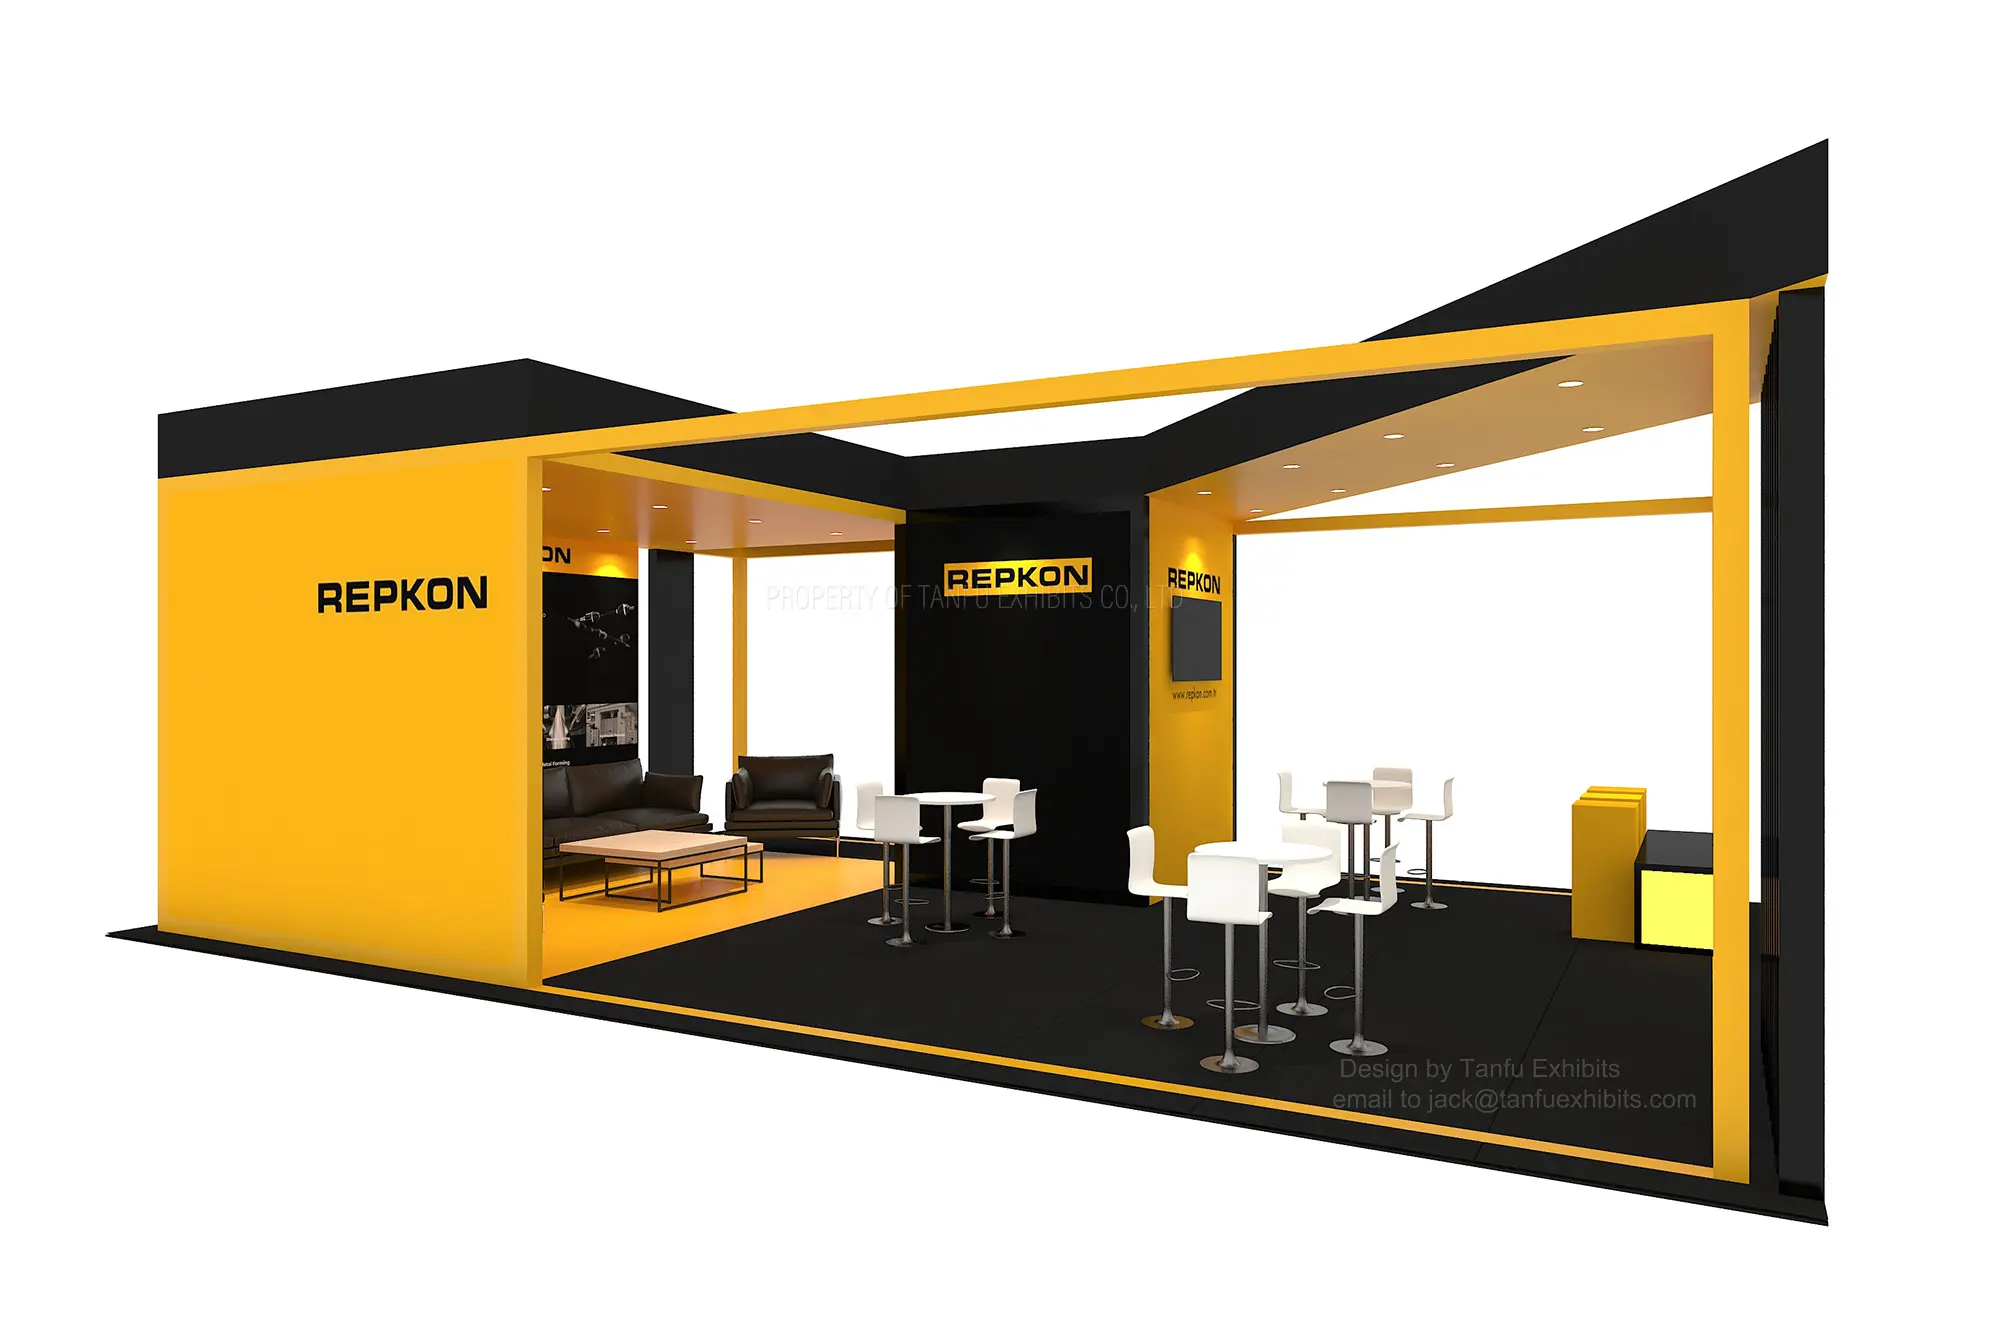 20x30ft or 6x9m Large Exhibition Booth for Other Trade Show Equipment